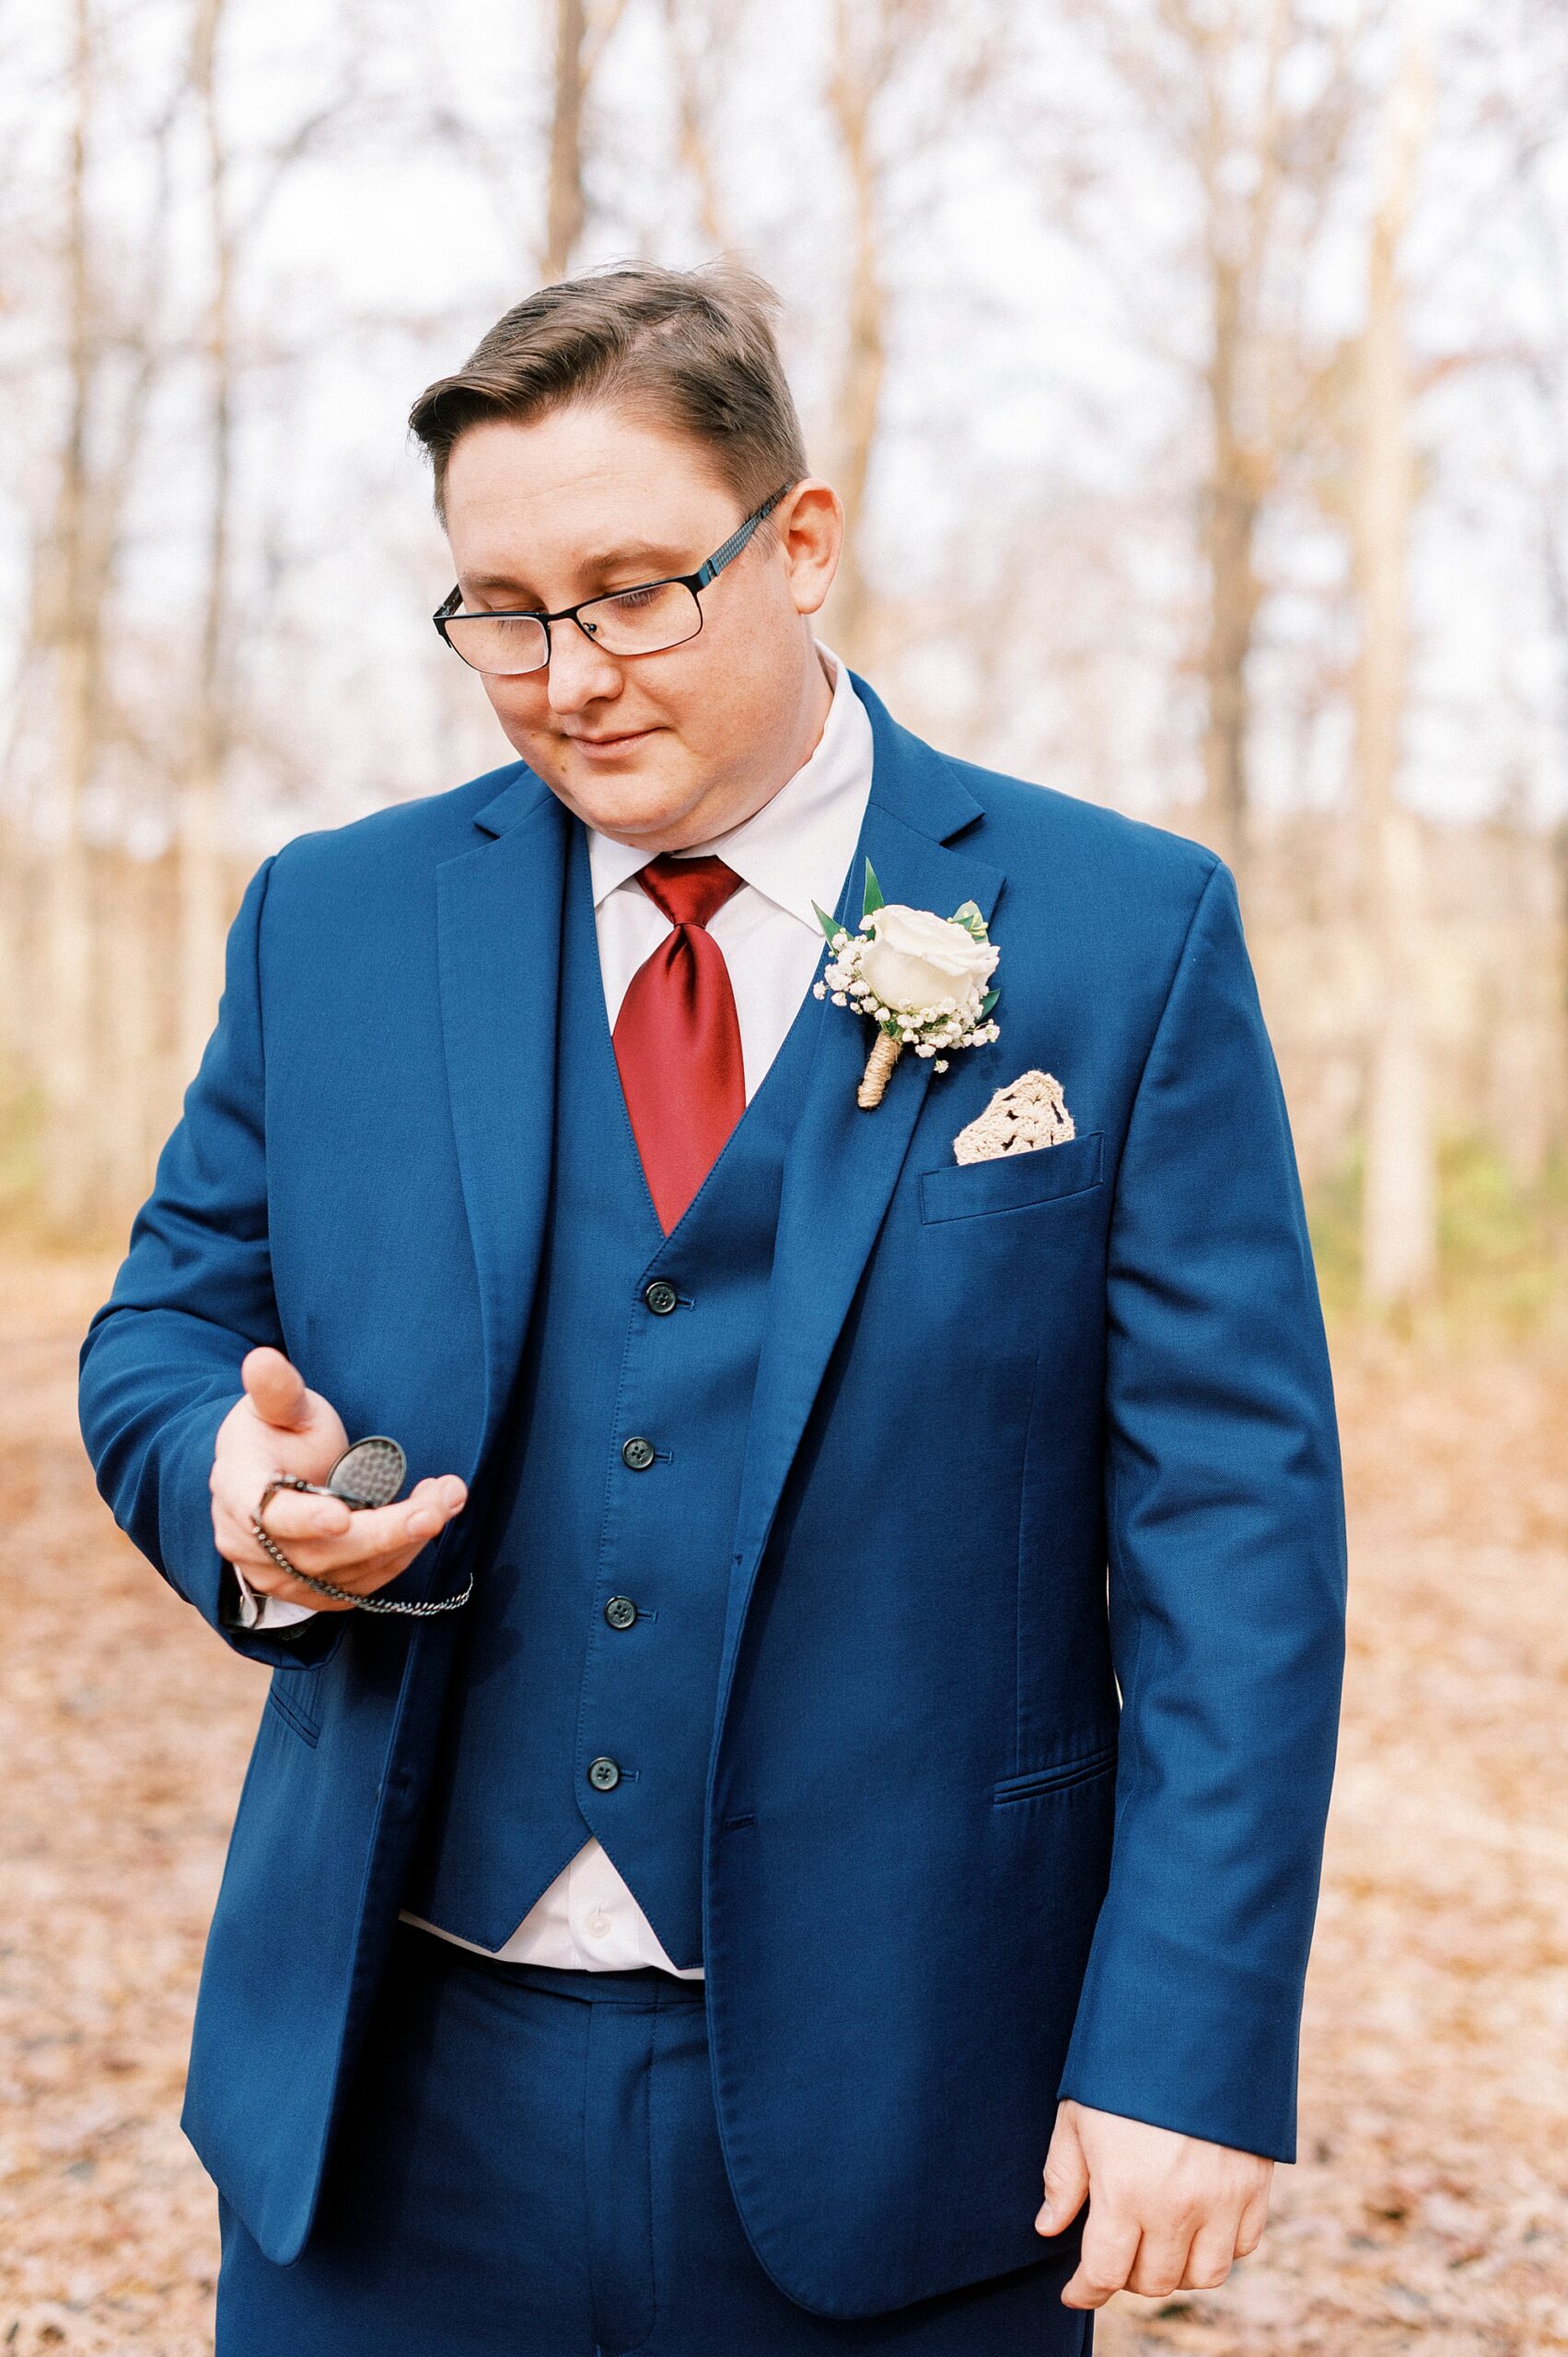 groom in navy suit with red tie looks at custom pocket watch 